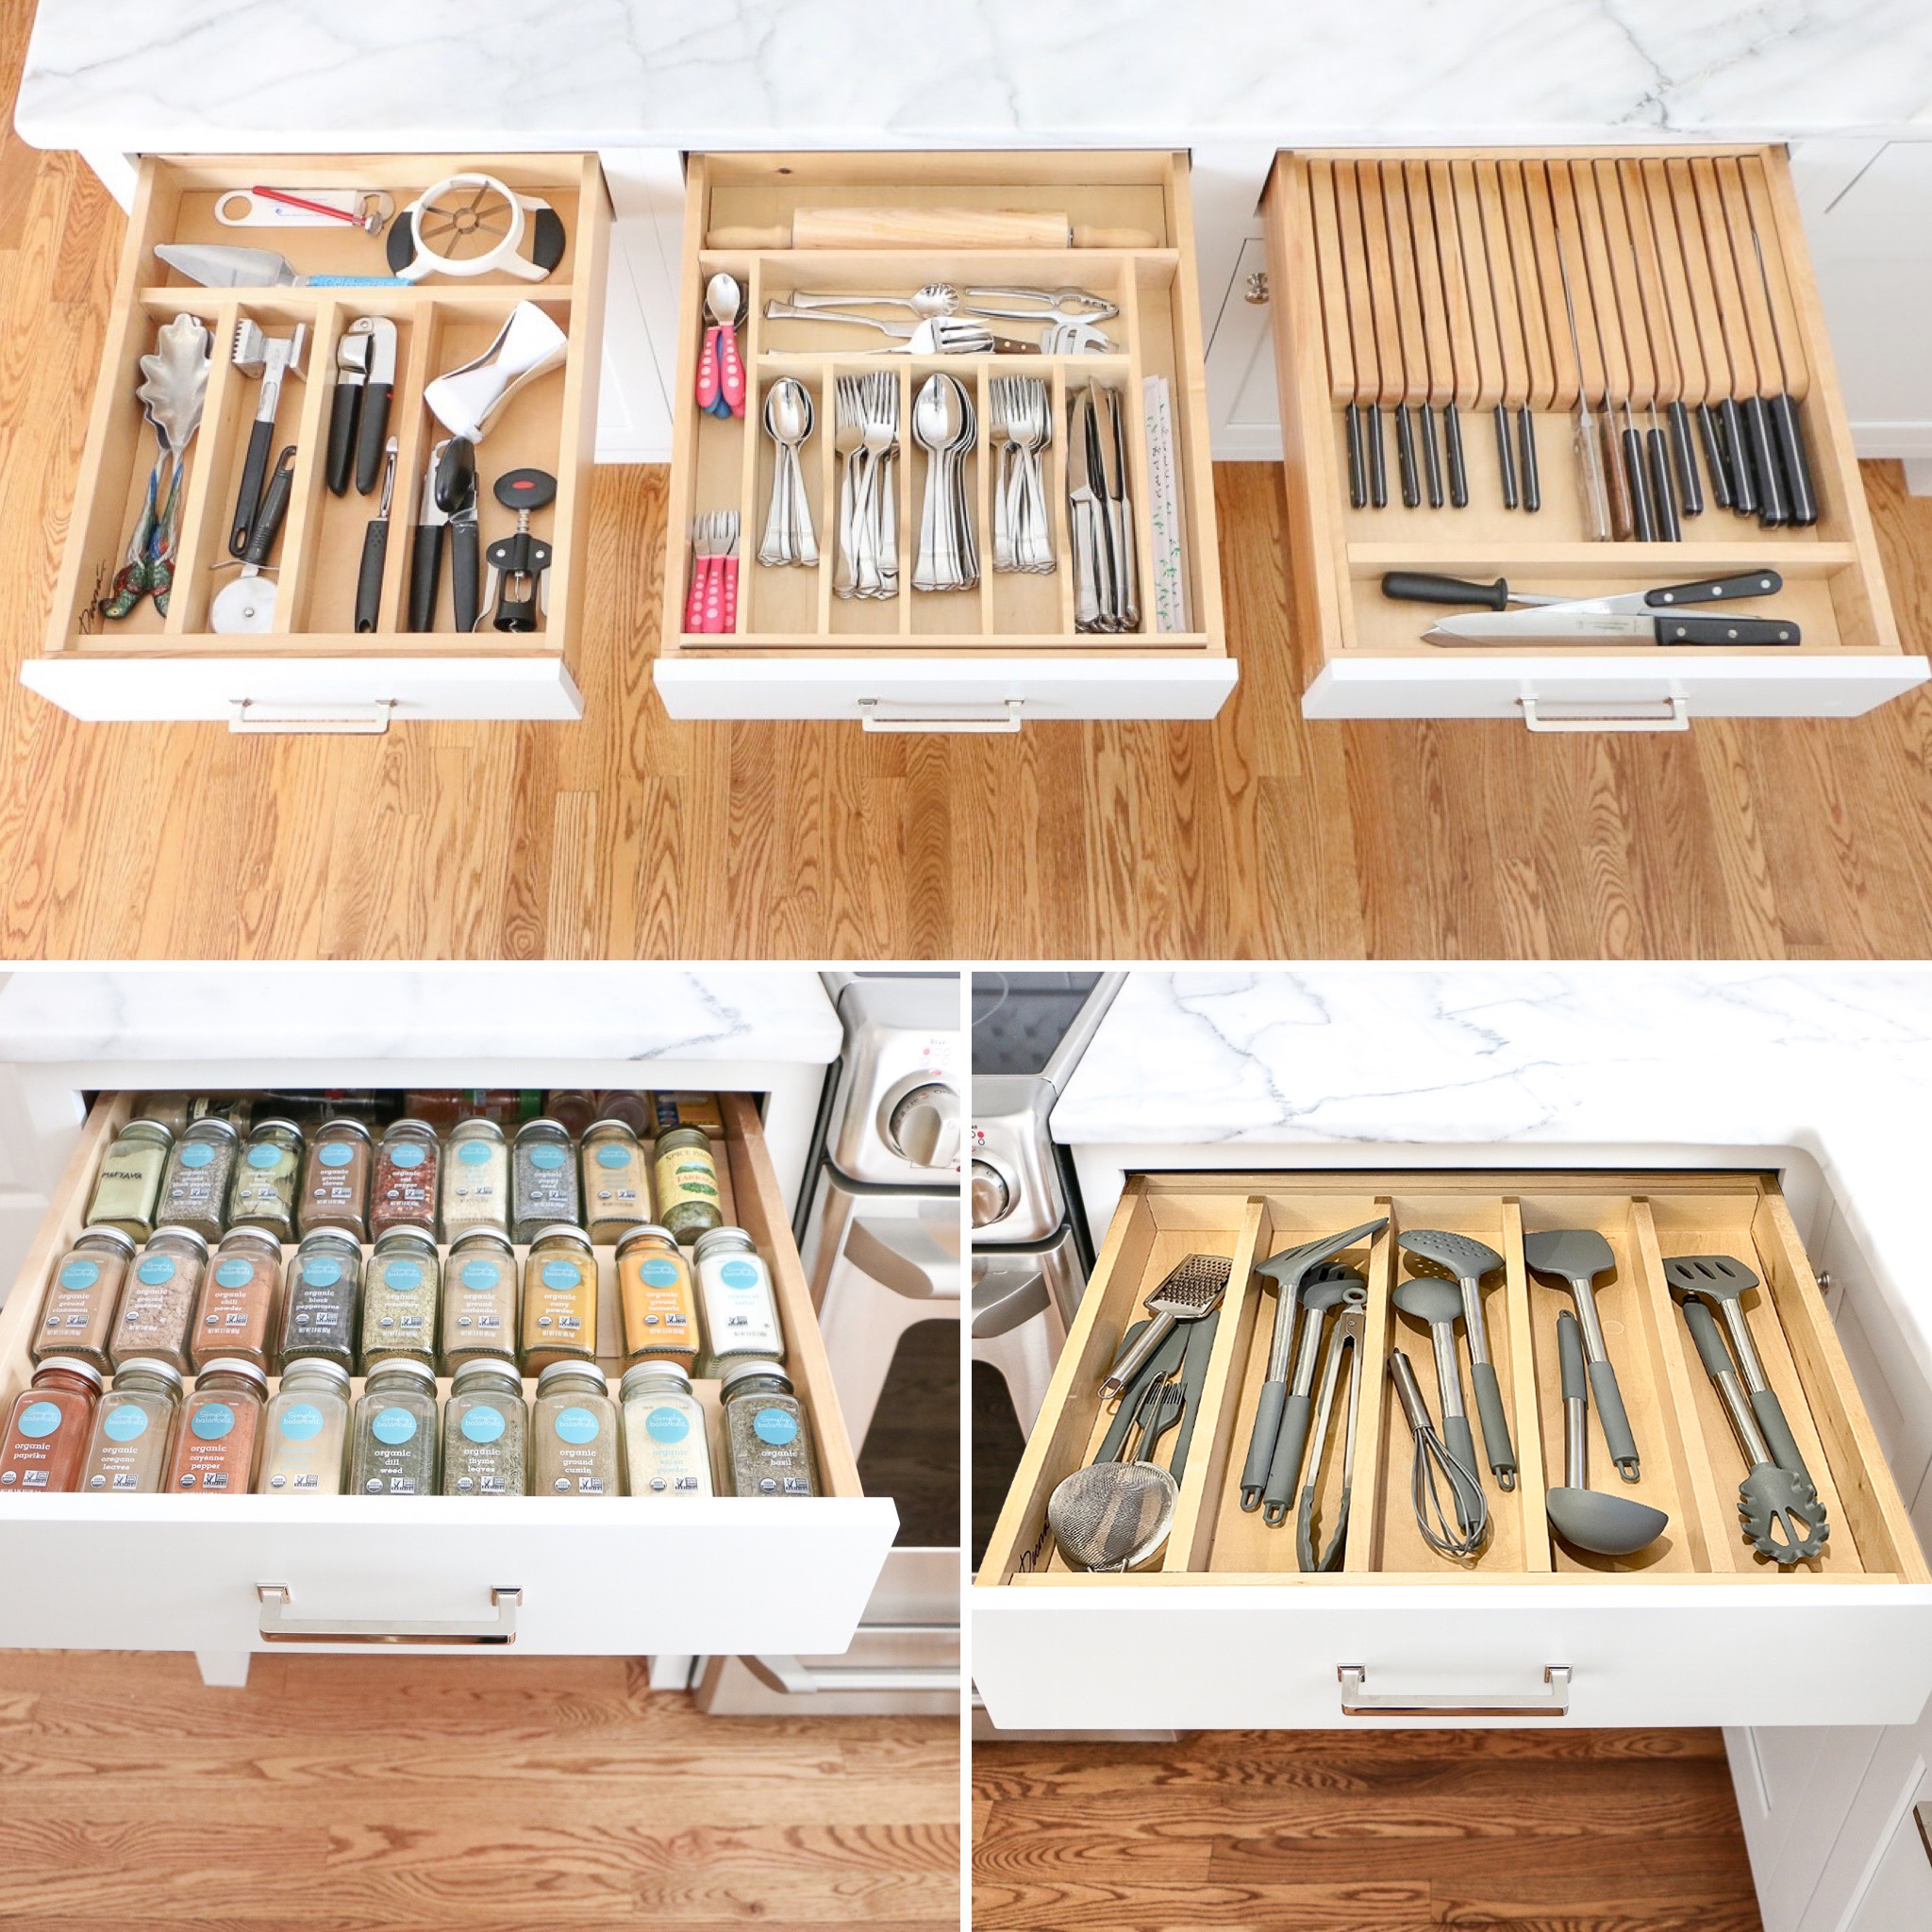 Kitchen Drawer Organizers, trim to fit drawer inserts for utensils, cutlery, kitchen tools, spices